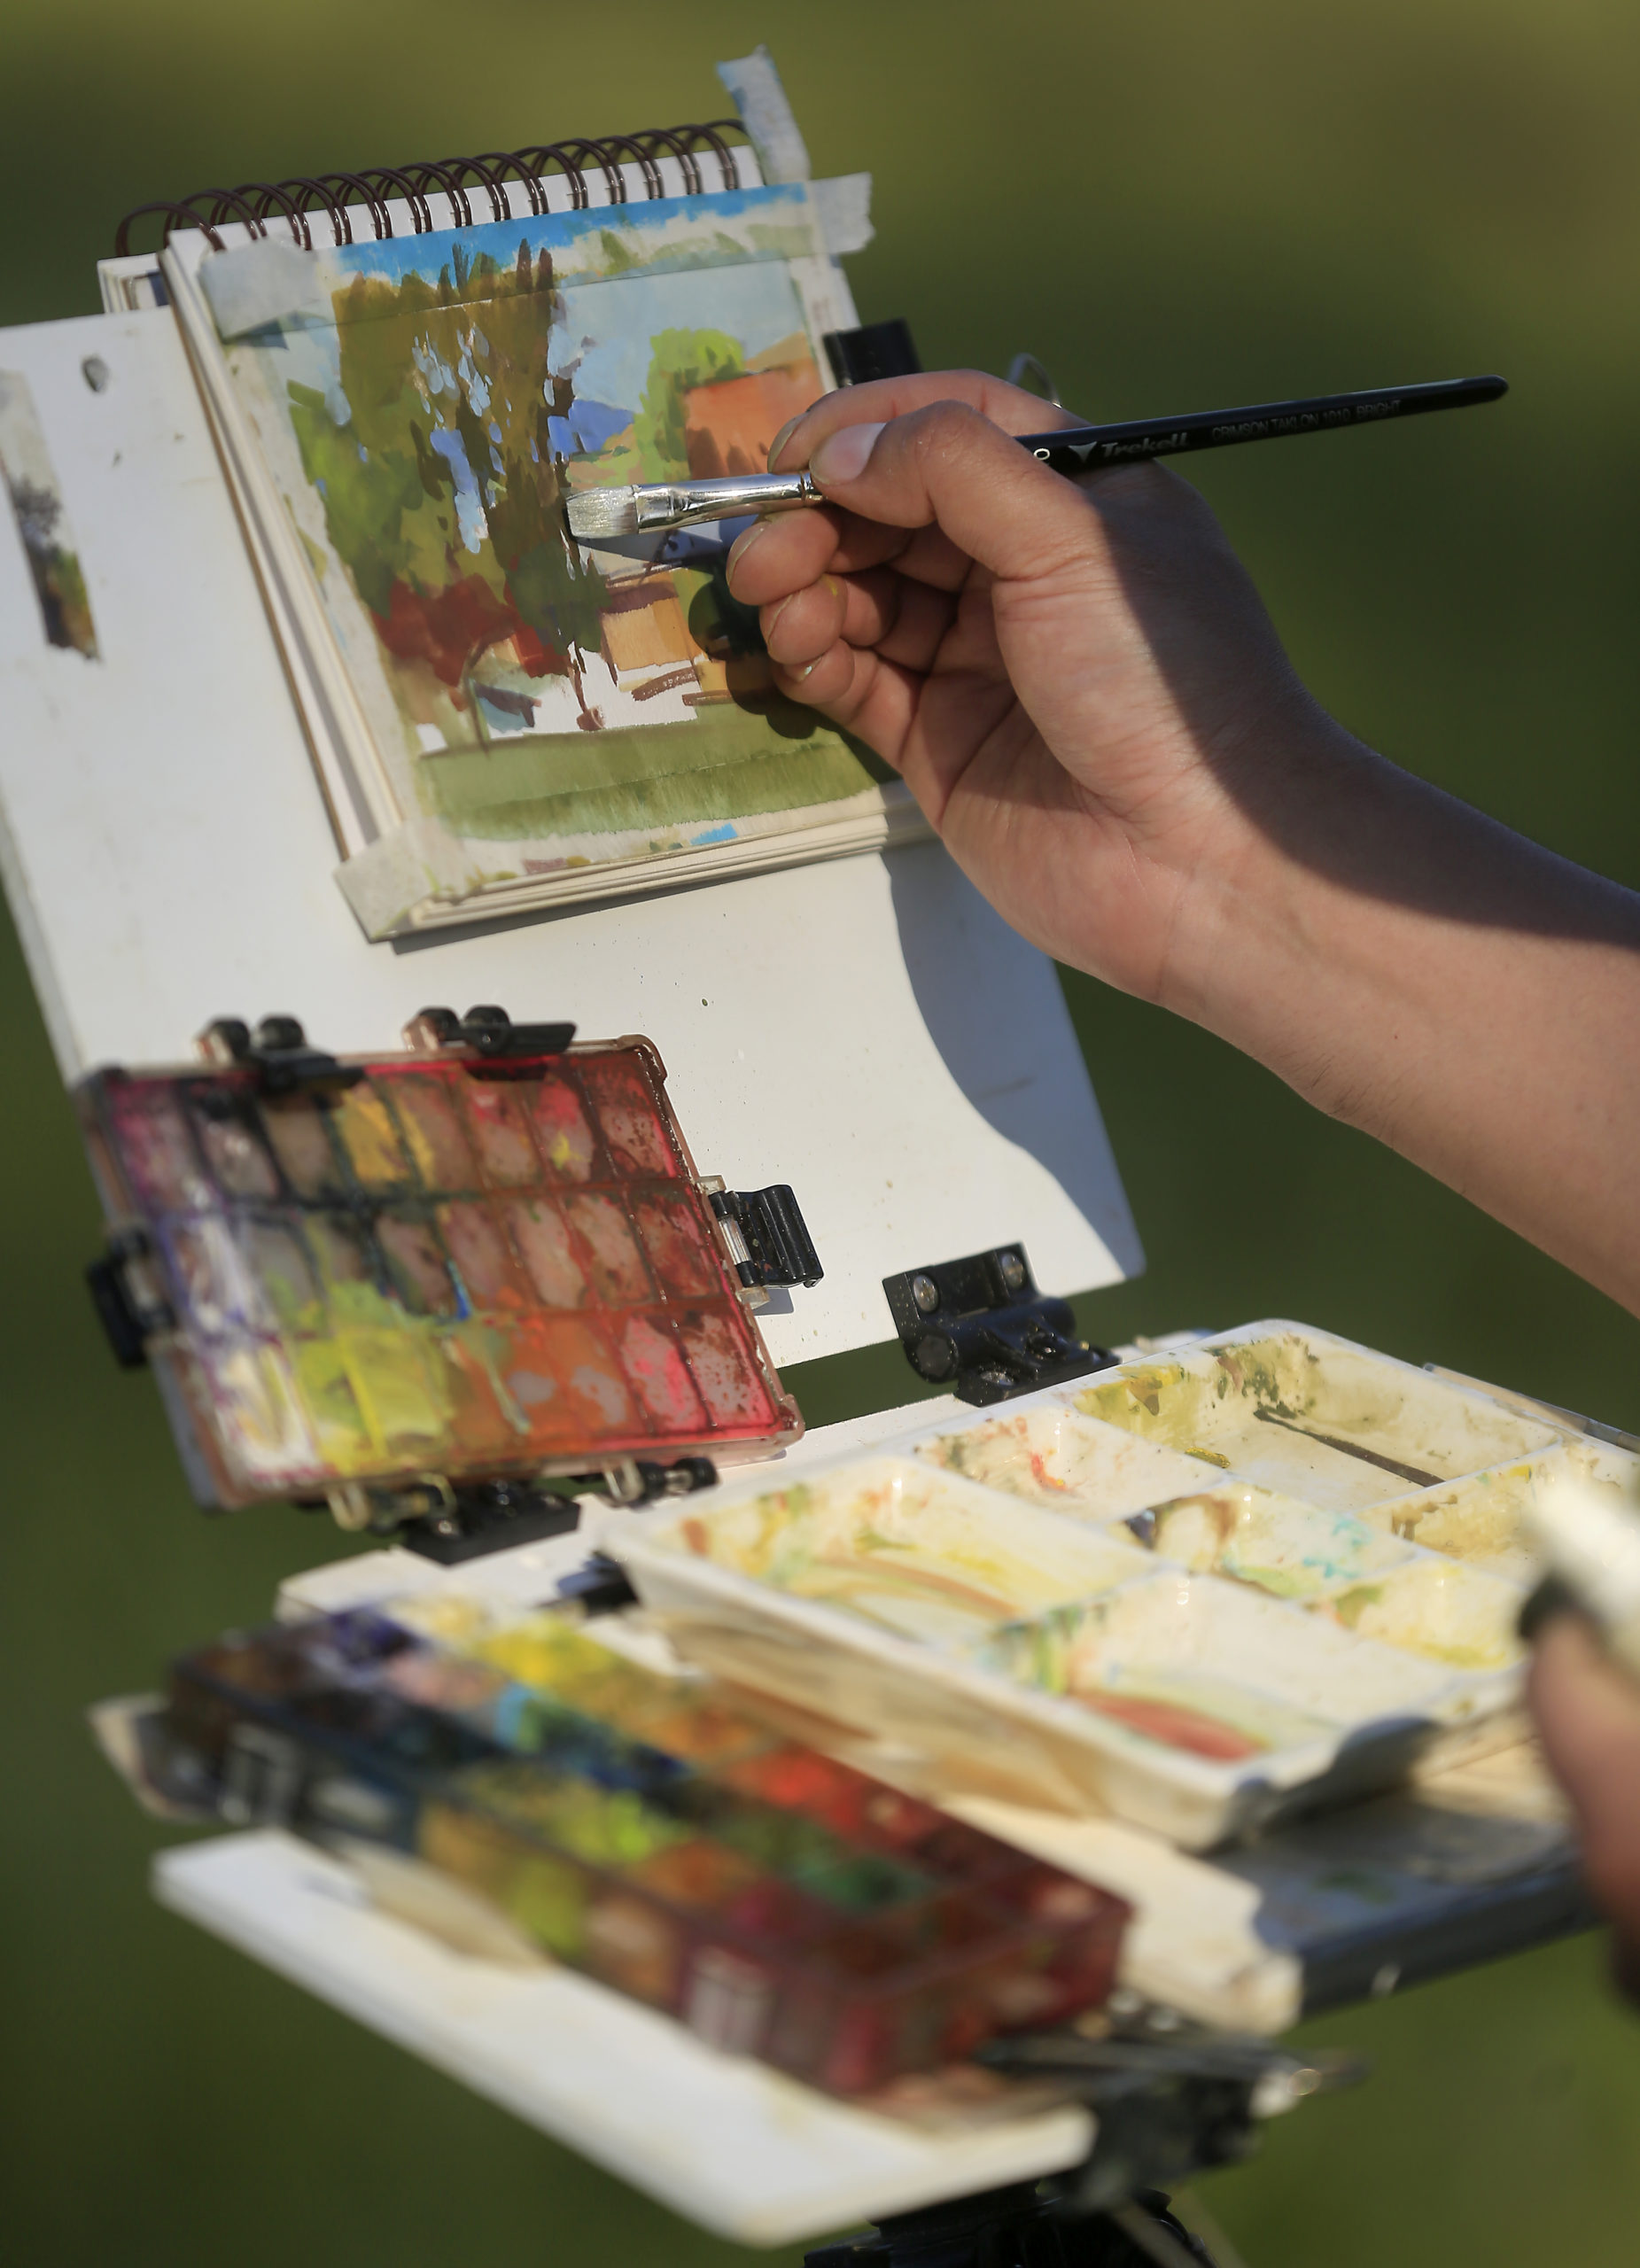 Plein air painter Sergio Lopez uses Tolay Regional Park in Lakeville as a backdrop for one of his paintings, Wednesday, May 5, 2021. (Kent Porter / The Press Democrat) 2021